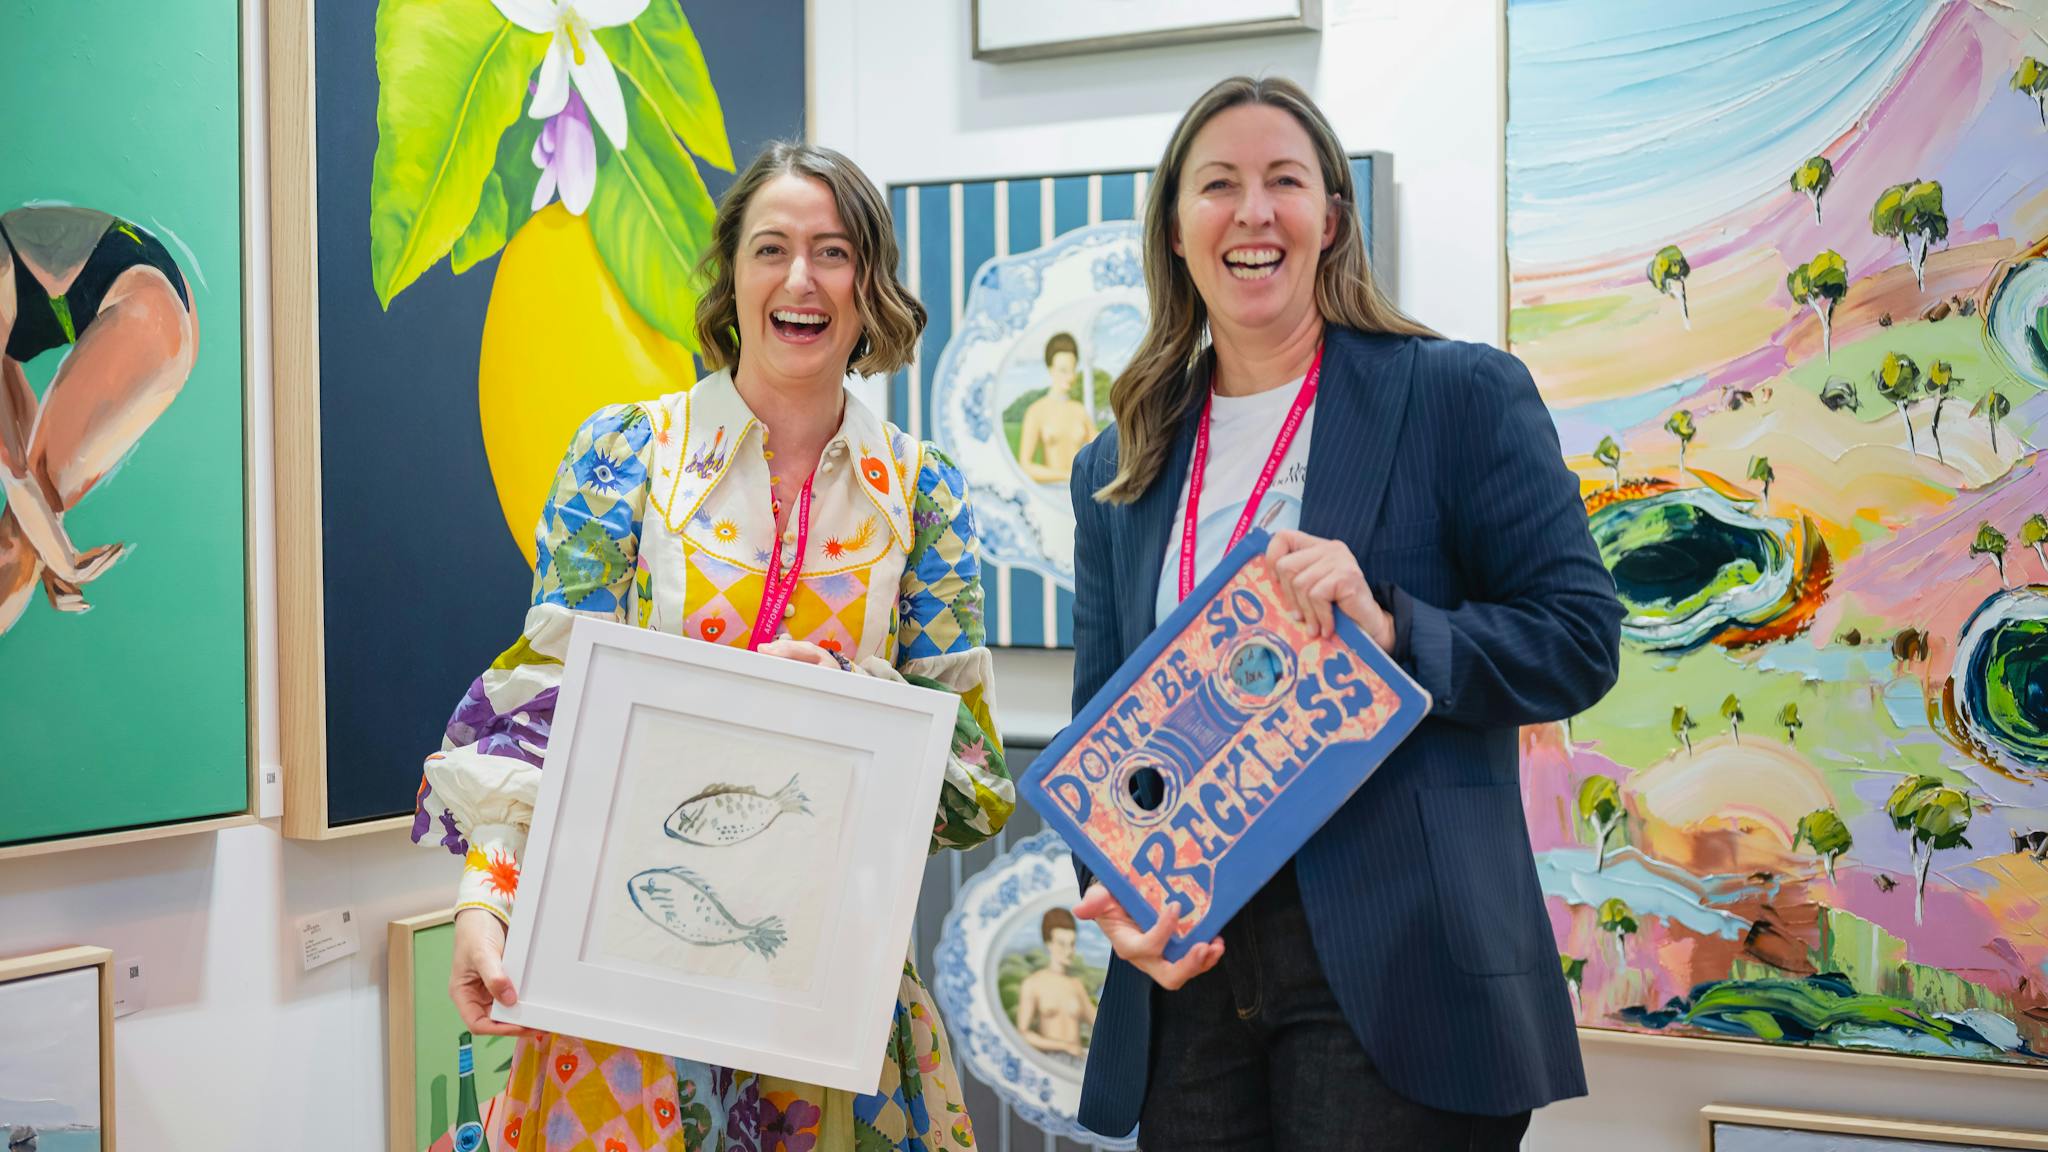 Two friendly gallerists at their Affordable Art Fair stand holding an artwork each